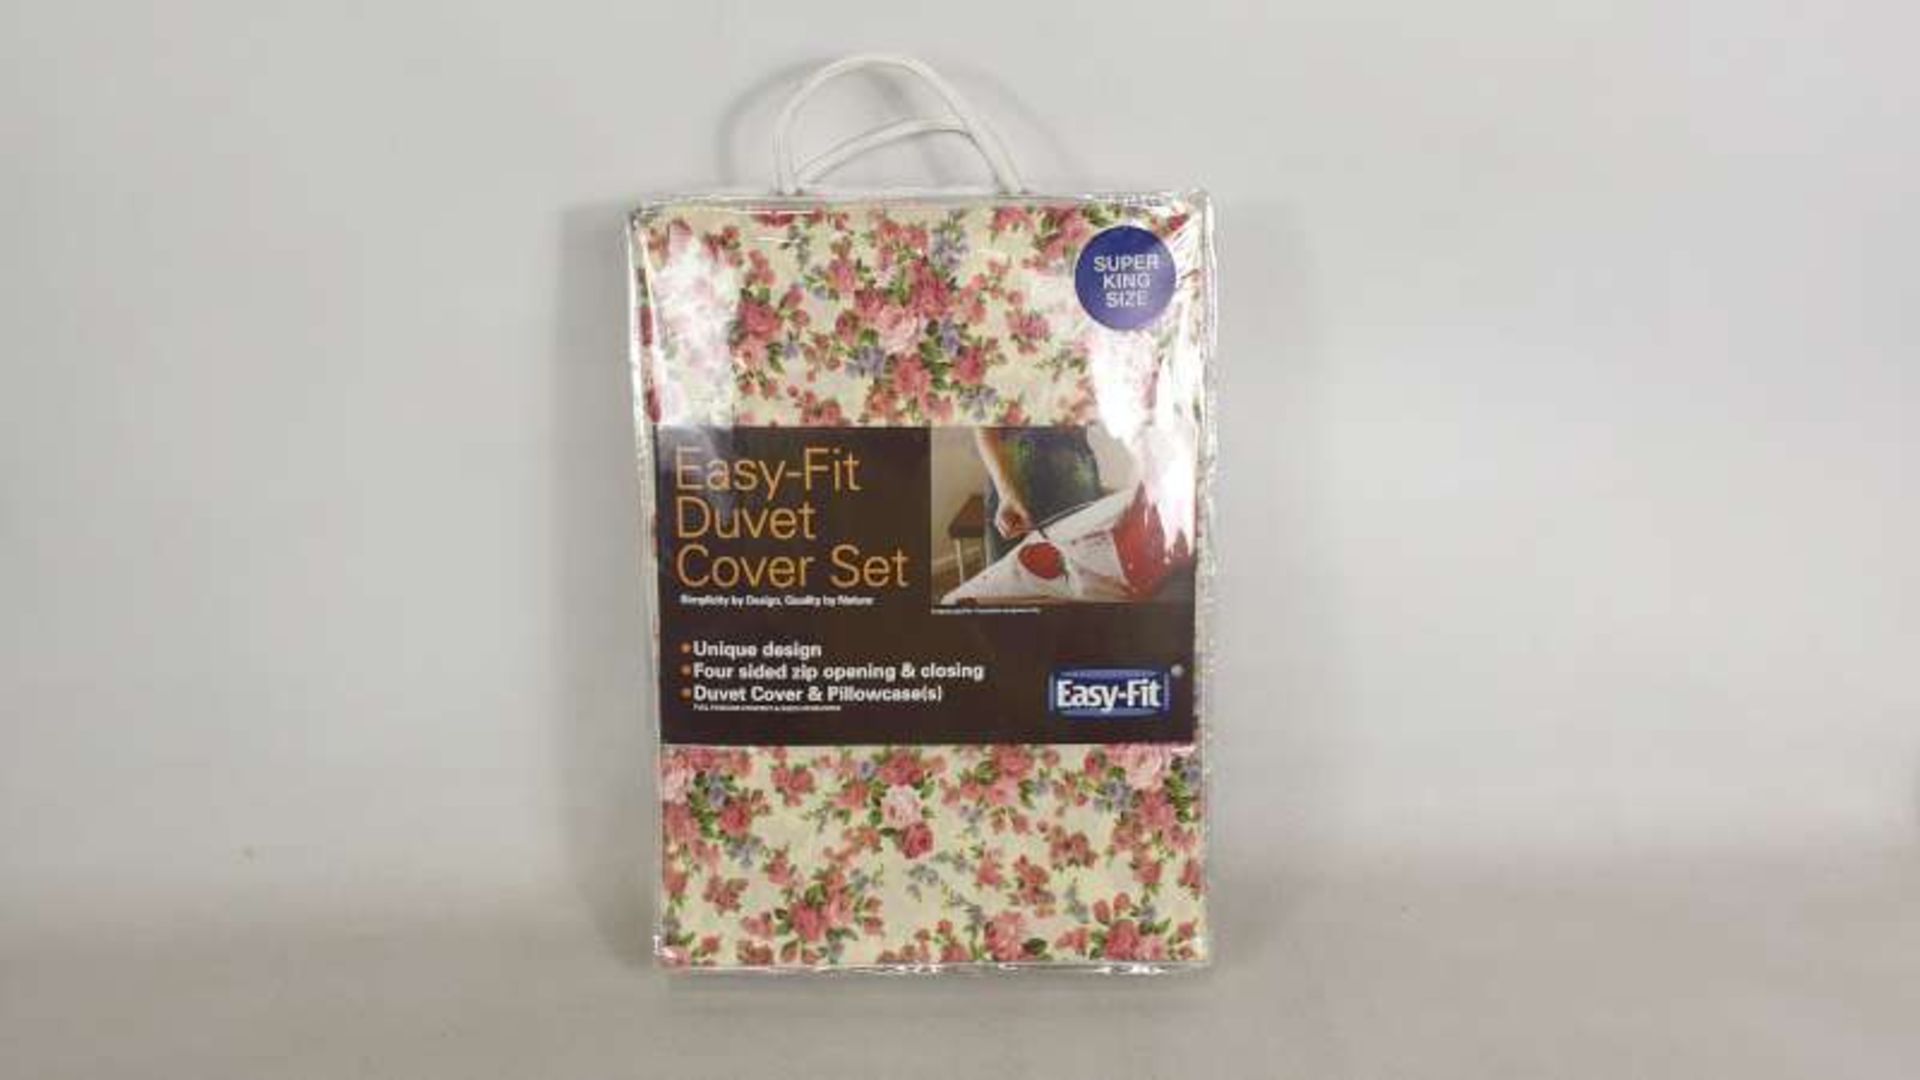 6 X BRAND NEW EASY-FIT SUPERKING SIZE PINK FLORAL DUVET + 2 PILLOWCASES RRP £73.65 PER PIECE